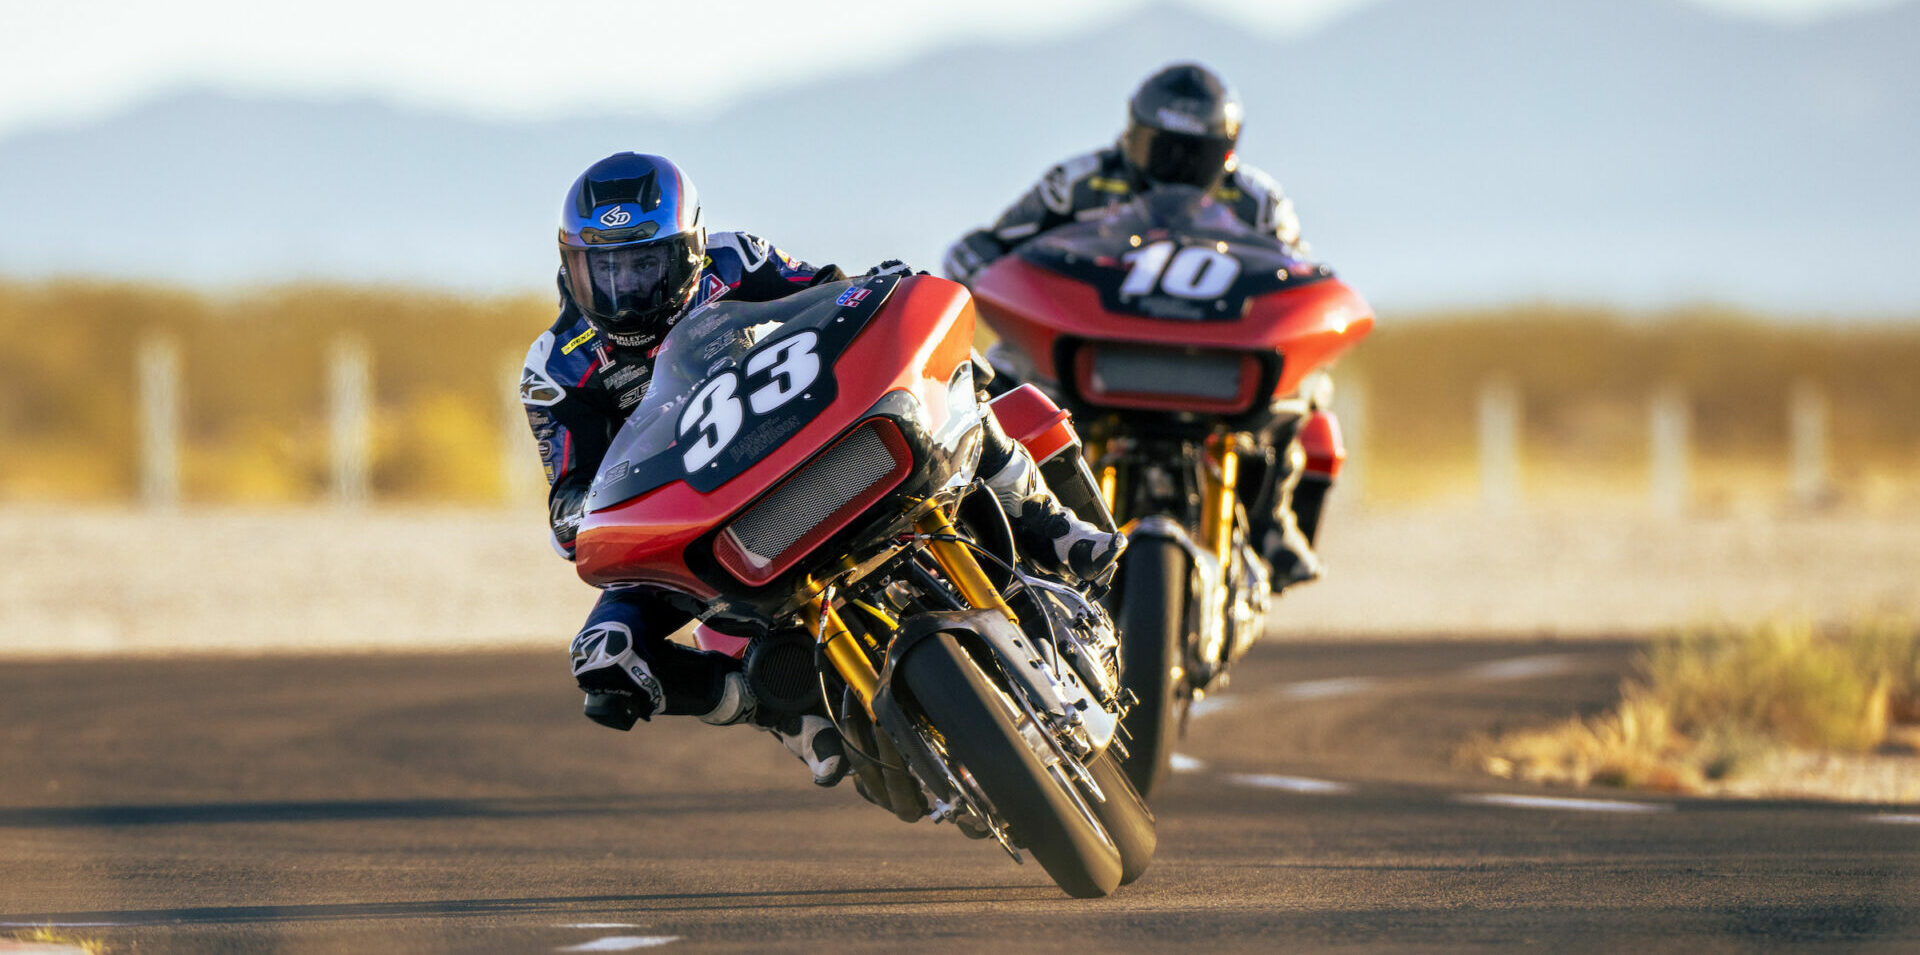 Brothers Kyle Wyman (33) and Travis Wyman (10) will ride for the factory Harley-Davidson Screamin' Eagle team in the 2023 MotoAmerica Mission King Of The Baggers Championship. Photo courtesy Harley-Davidson.